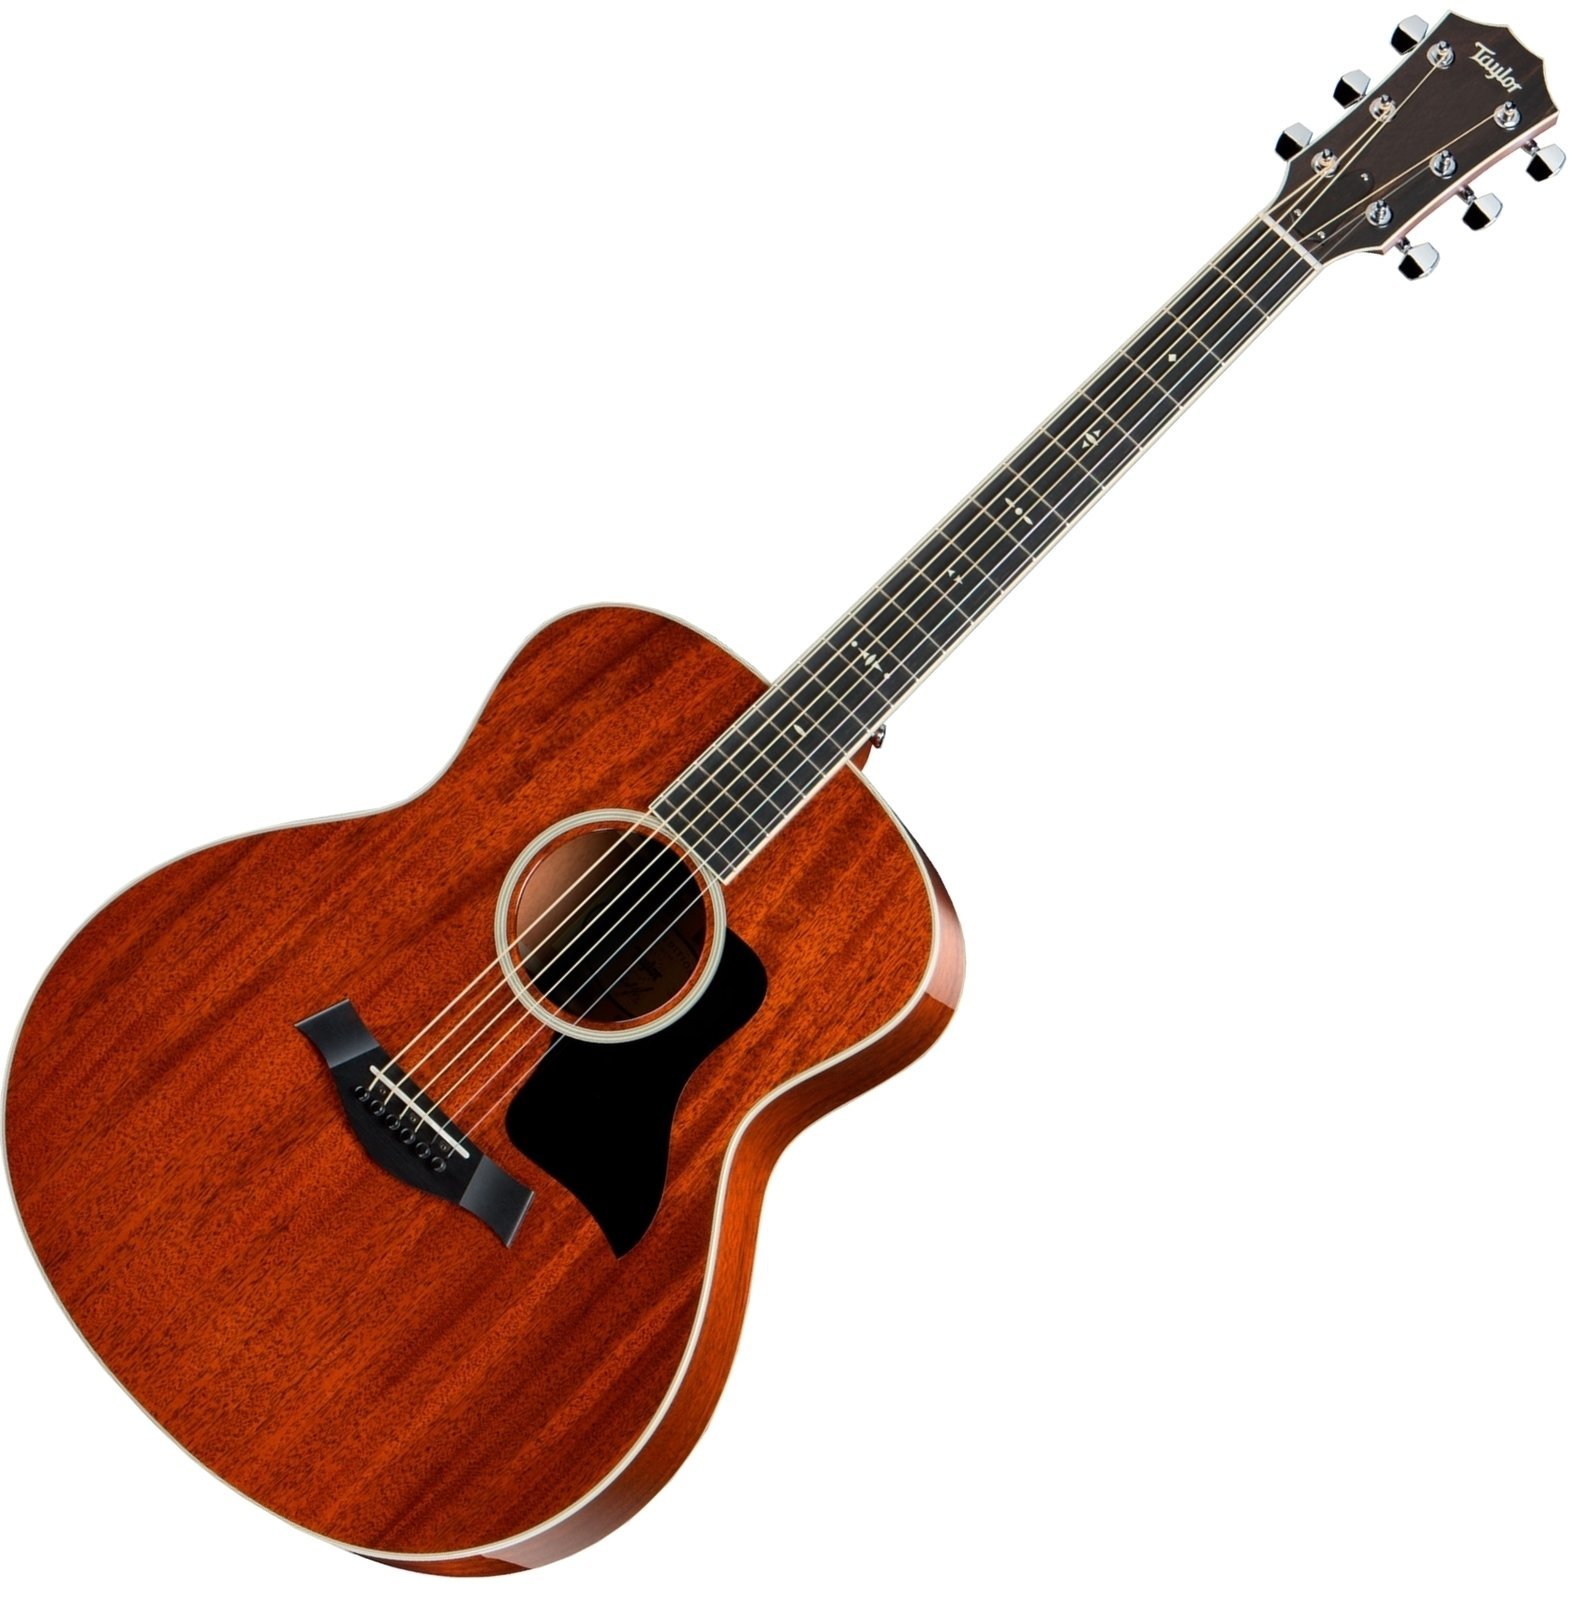 Guitare acoustique Jumbo Taylor Guitars 528 Grand Orchestra